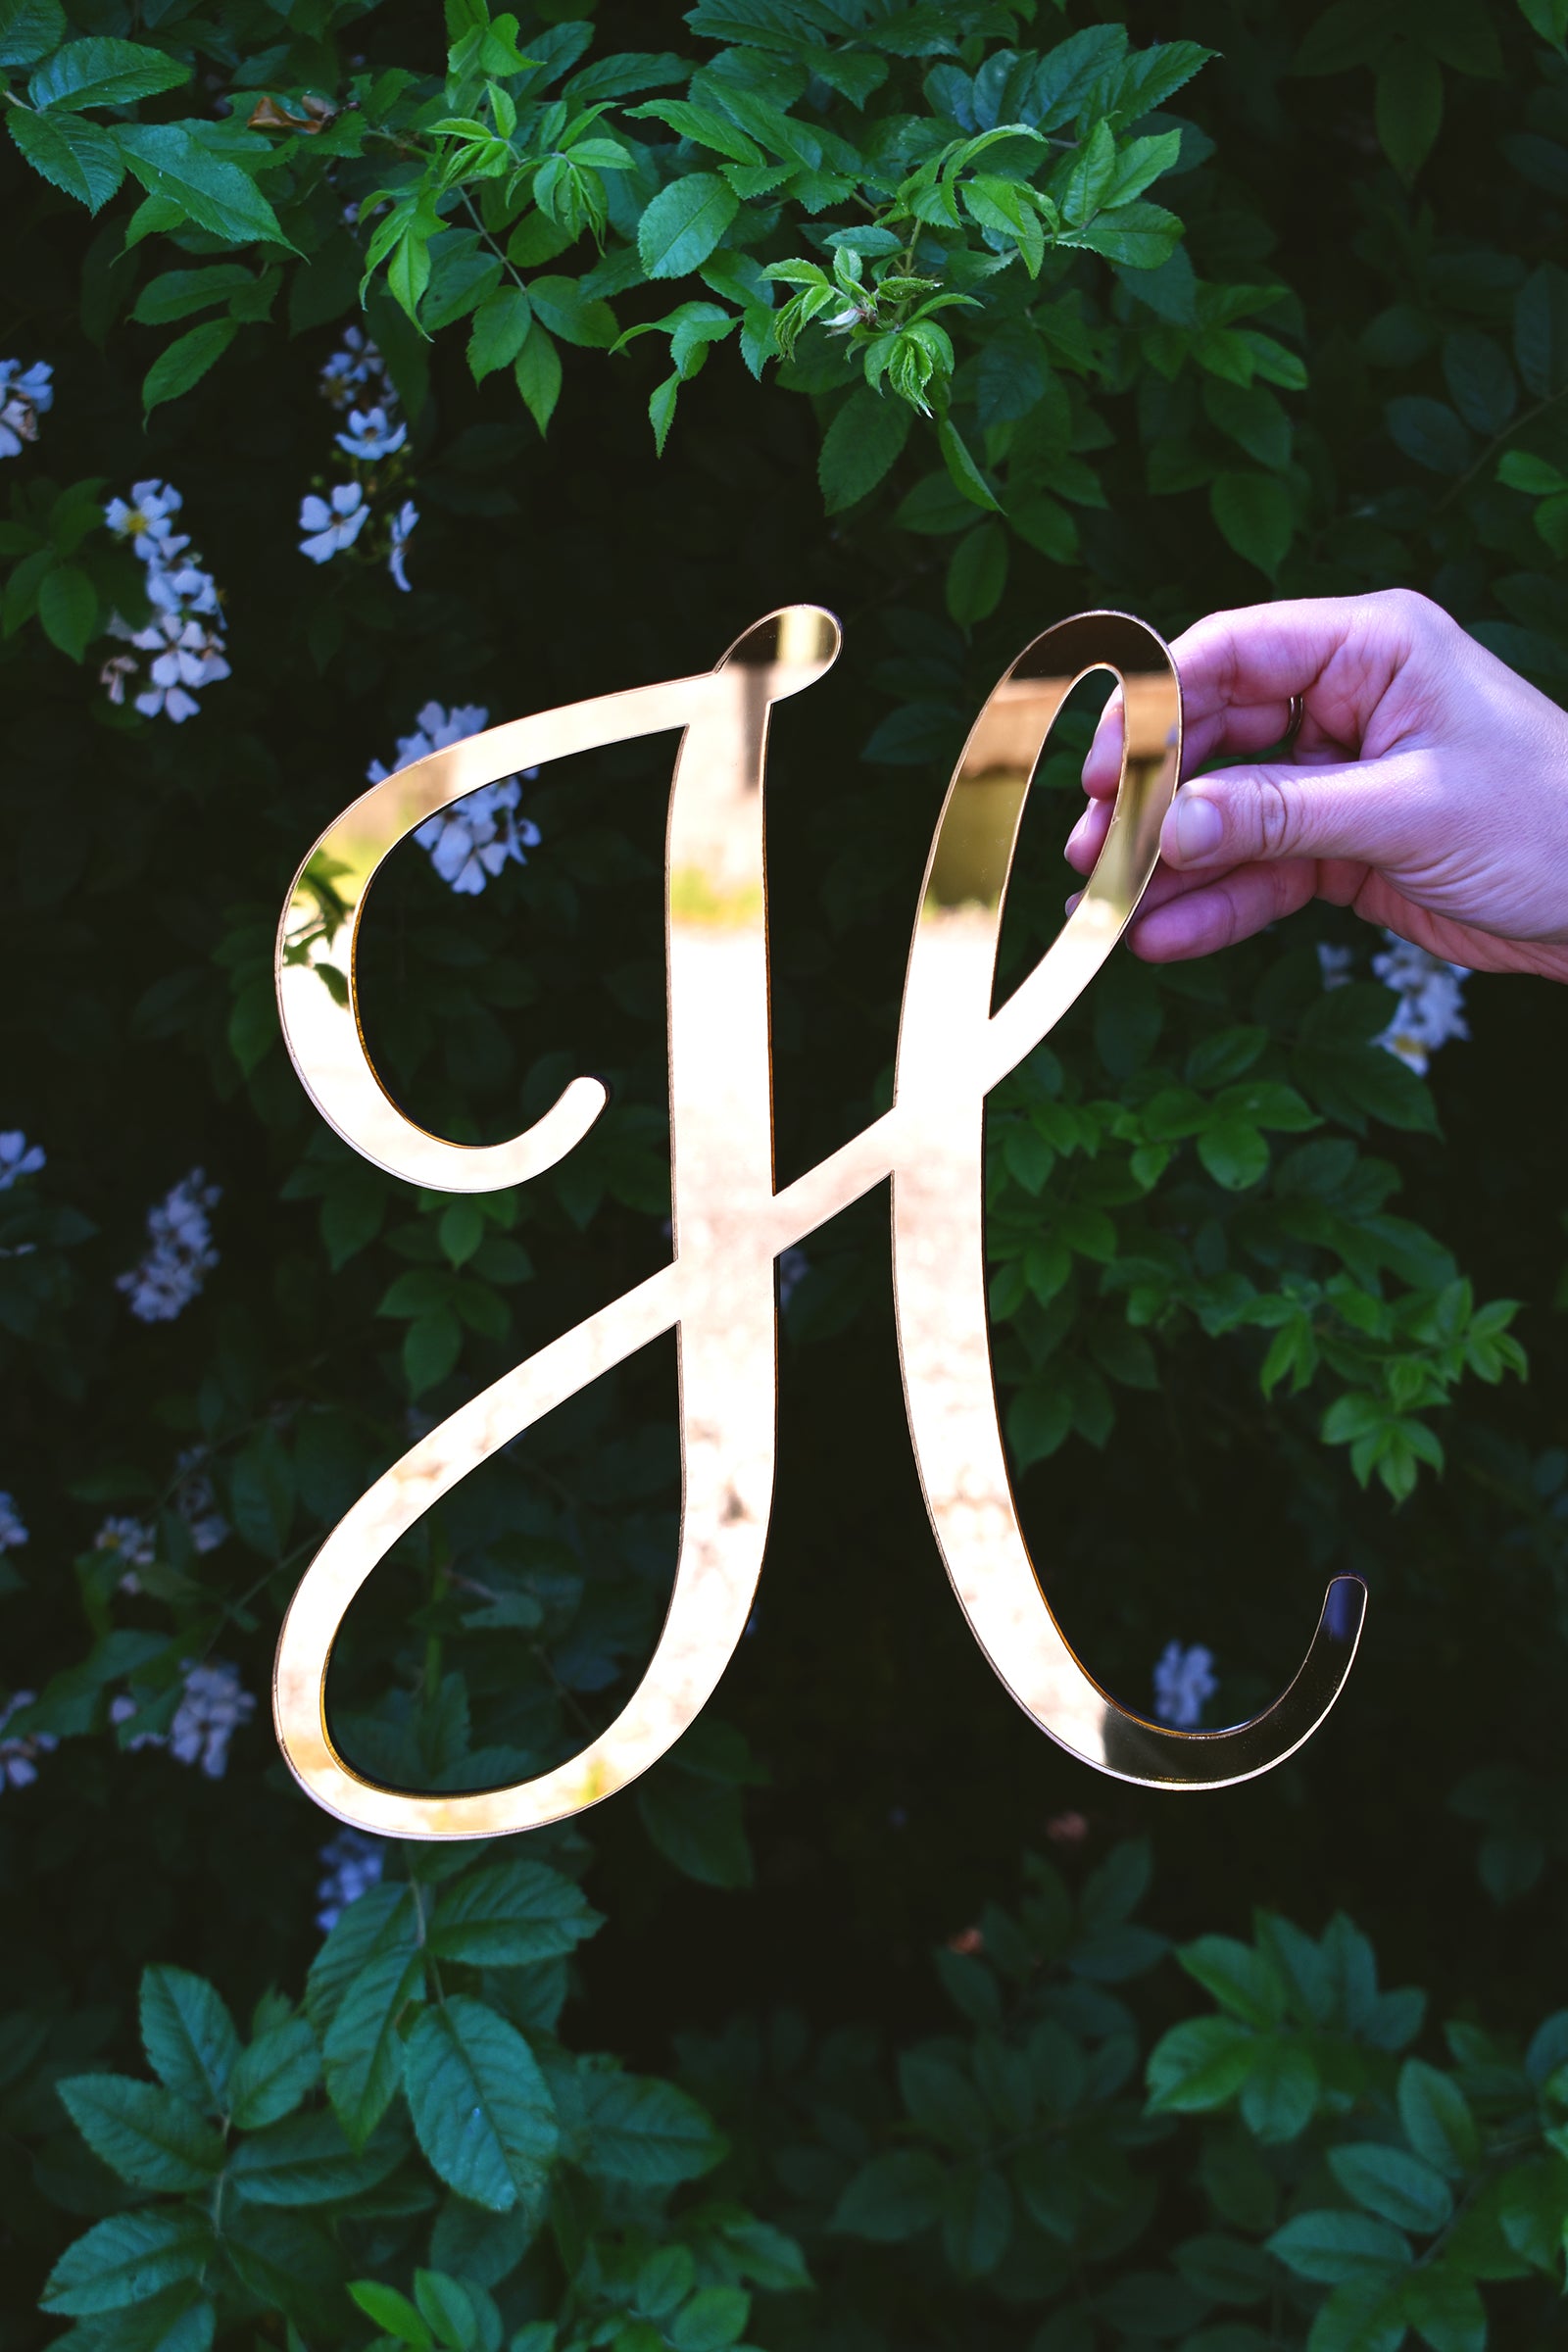 Mirrored Monogram wall Letters in Calligraphy Style - thebestcaketoppers